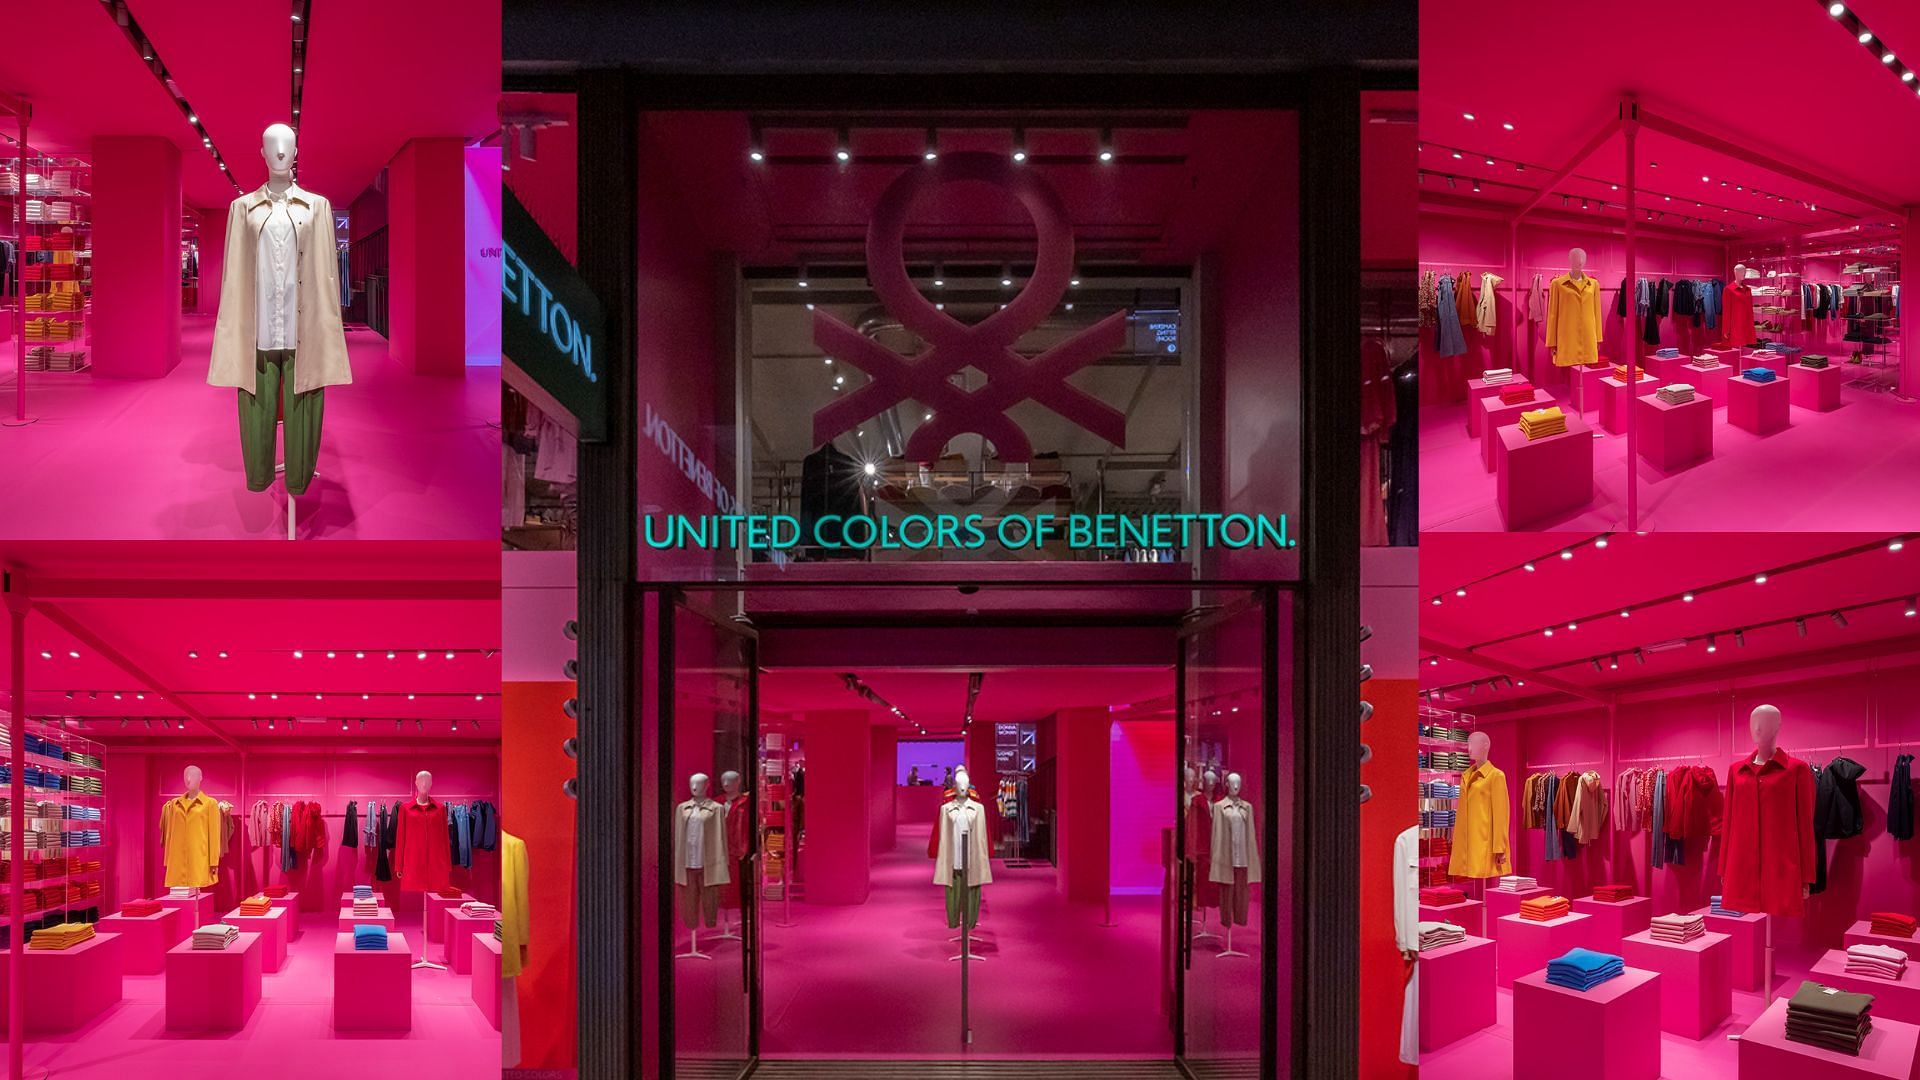 Benetton is stepping into the metaverse space with a retail store (Image via Sportskeeda)